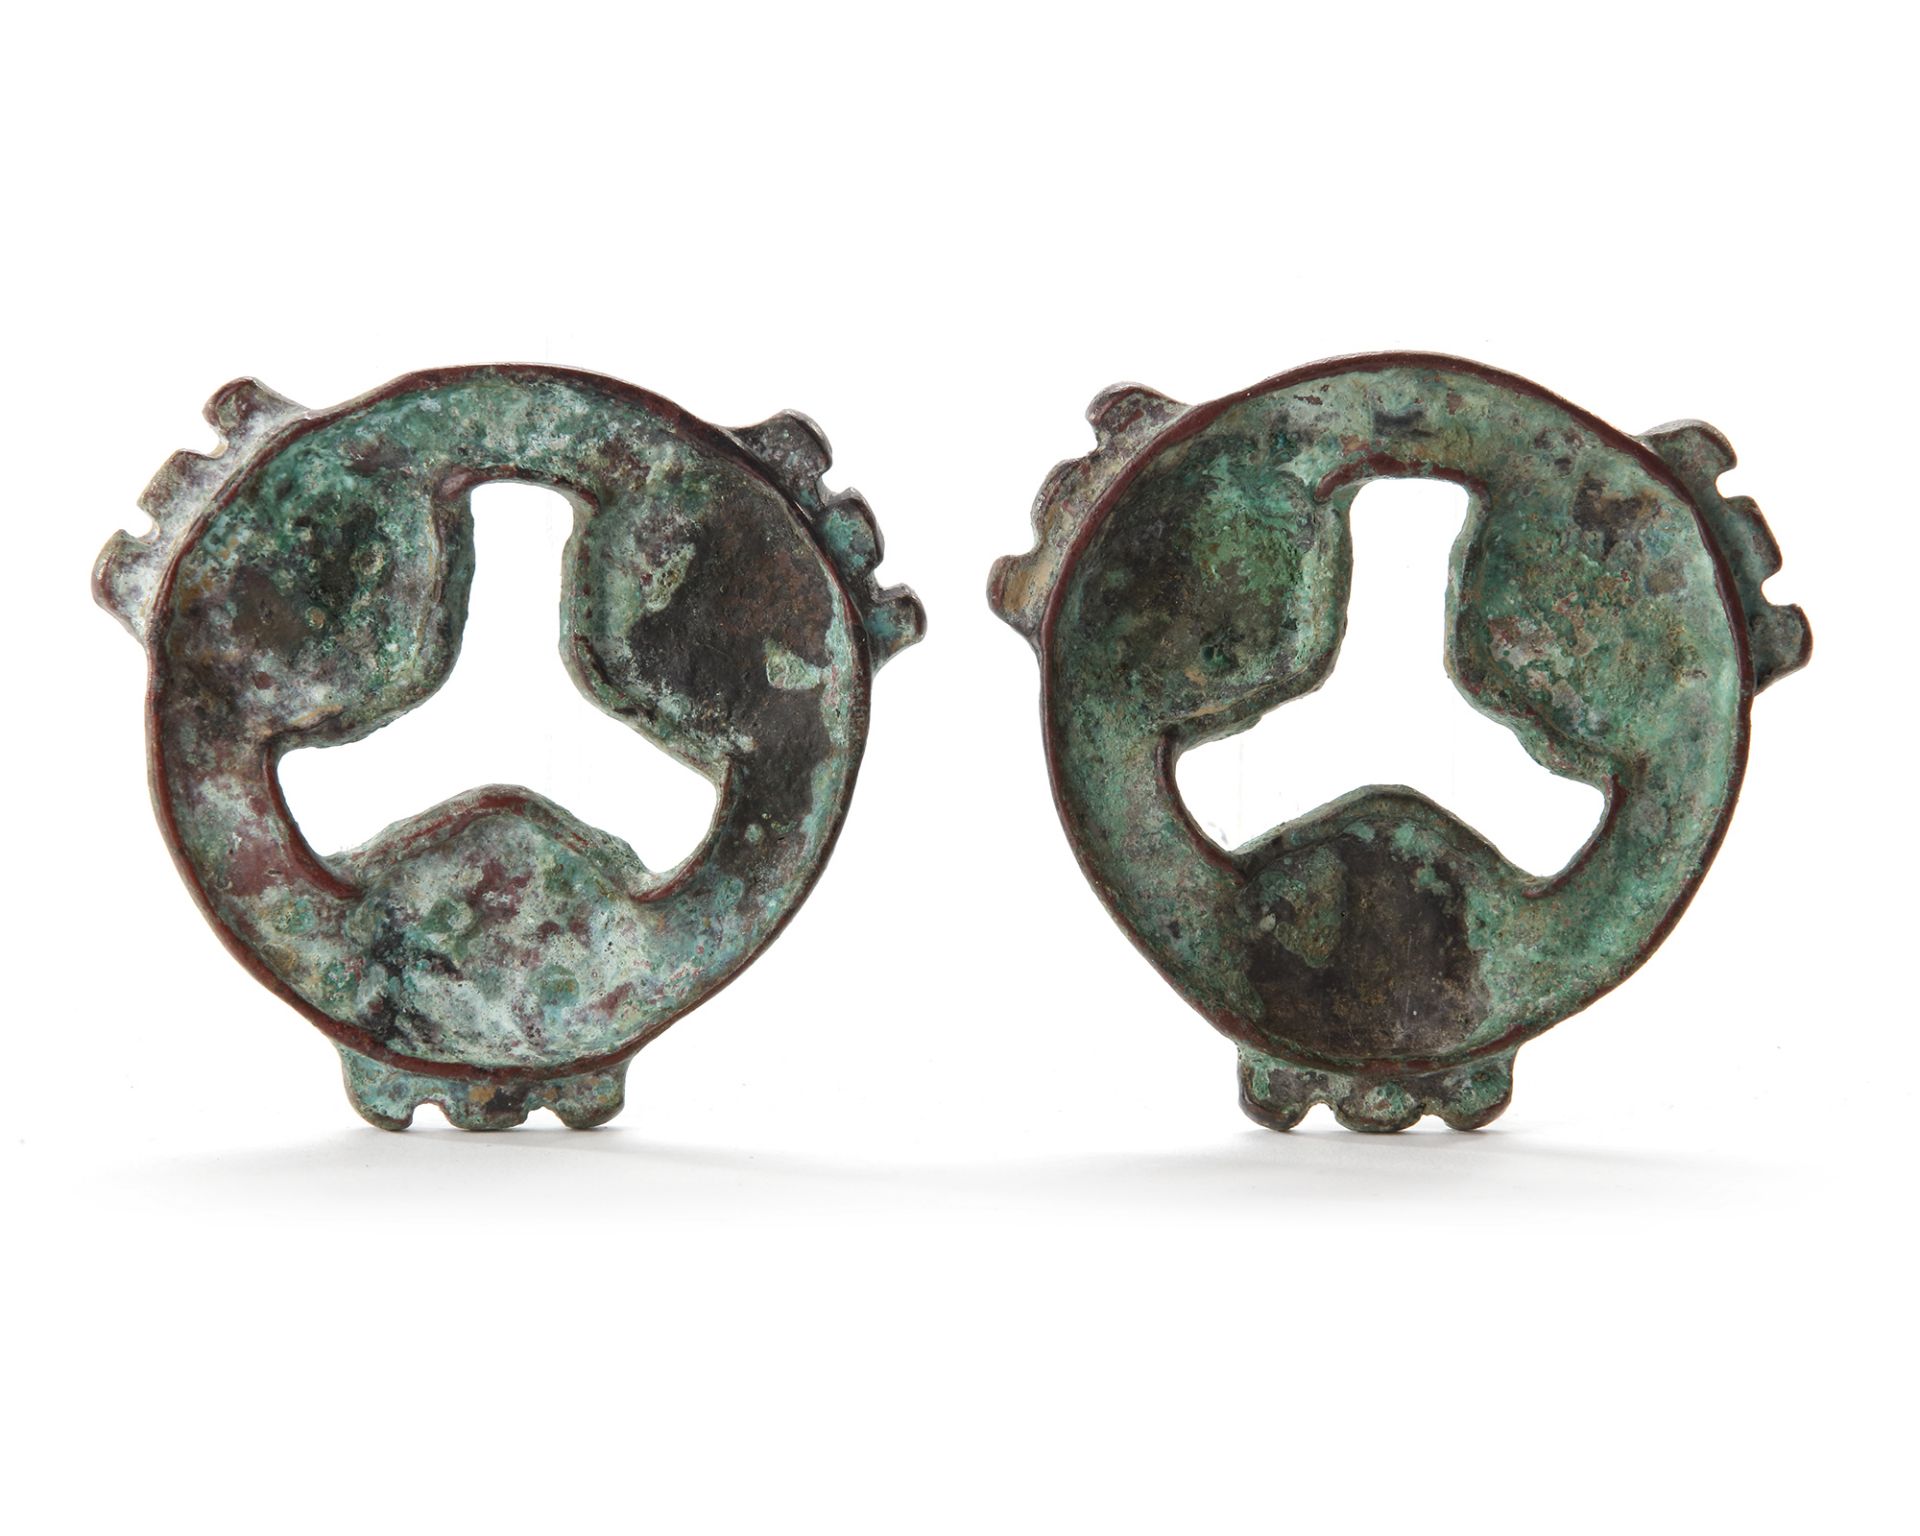 A PAIR OF CHINESE BRONZE HORSE ACCESSORIES, WESTERN ZHOU DYNASTY (711-256 BC) - Image 2 of 5